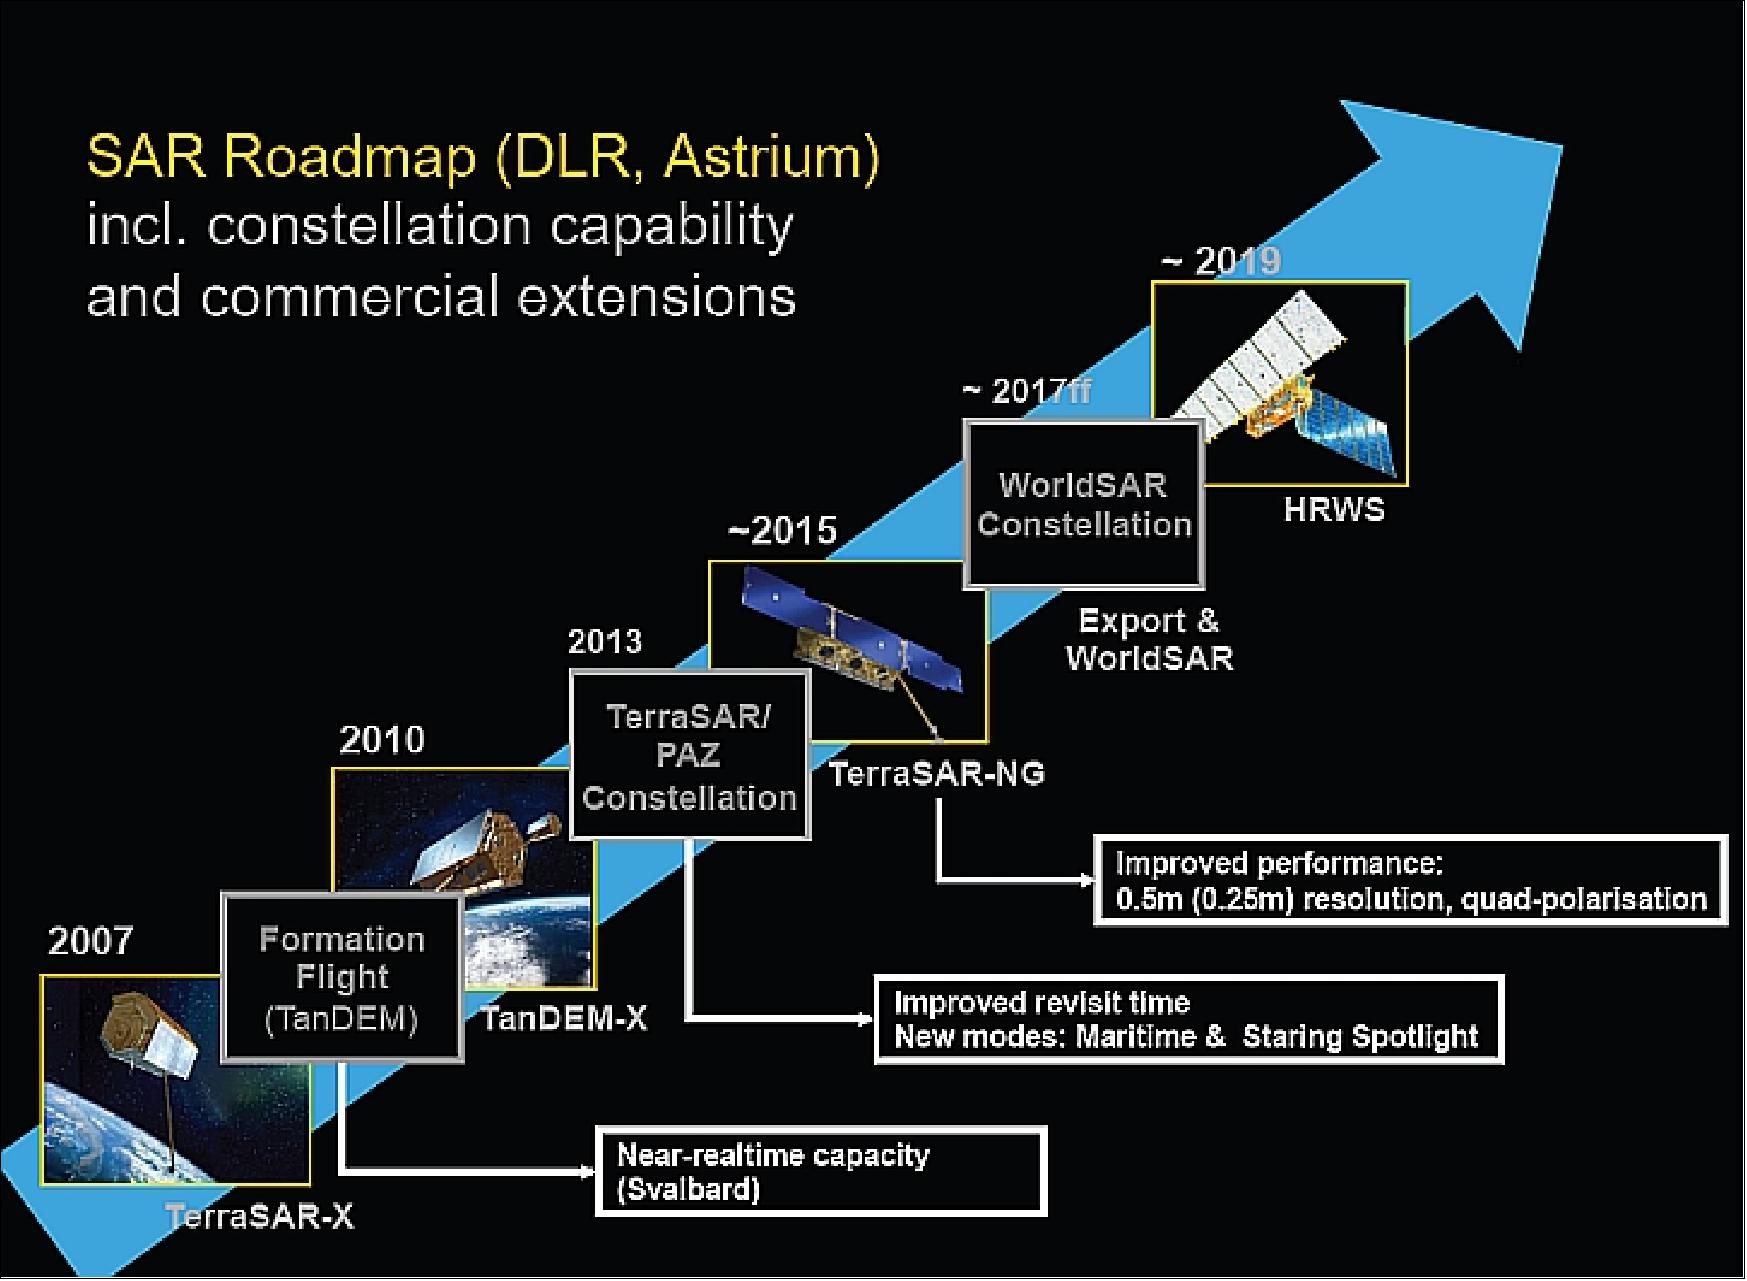 Figure 1: Overview of the SAR program roadmap in 2012 (image credit: DLR, Astrium GEO-Information Services) 15)